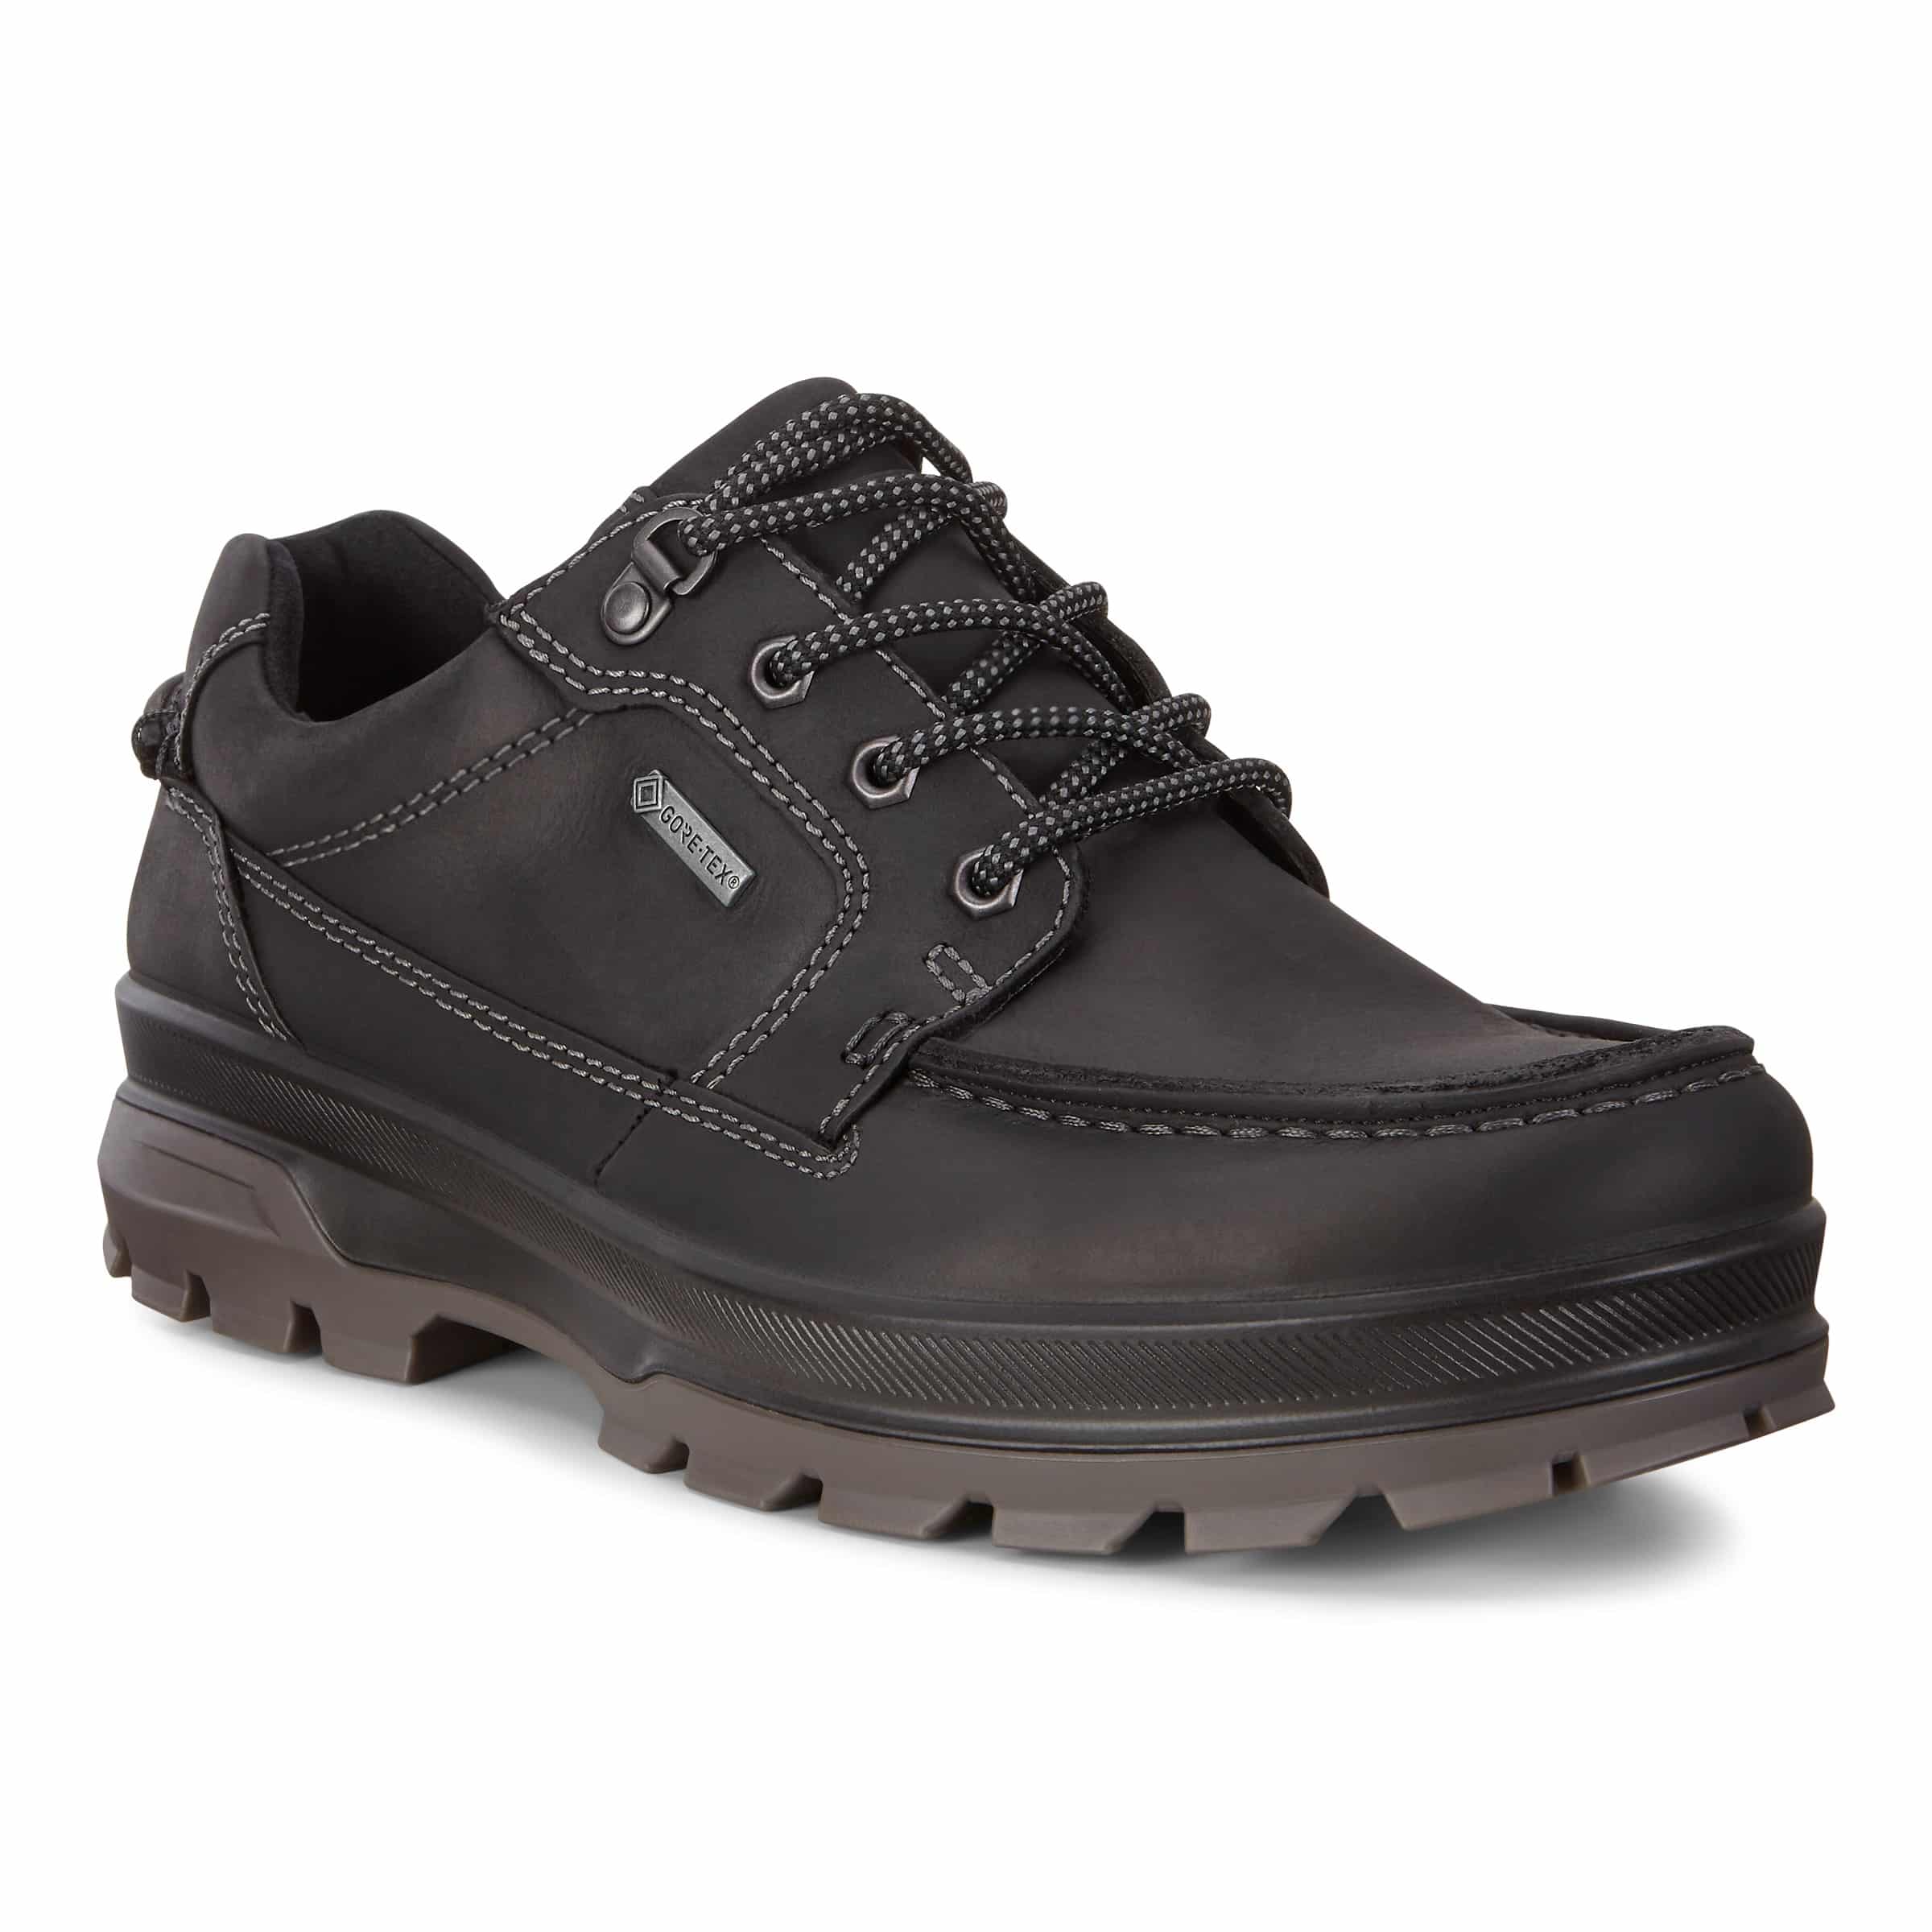 Ecco Rugged Track - 121 Shoes